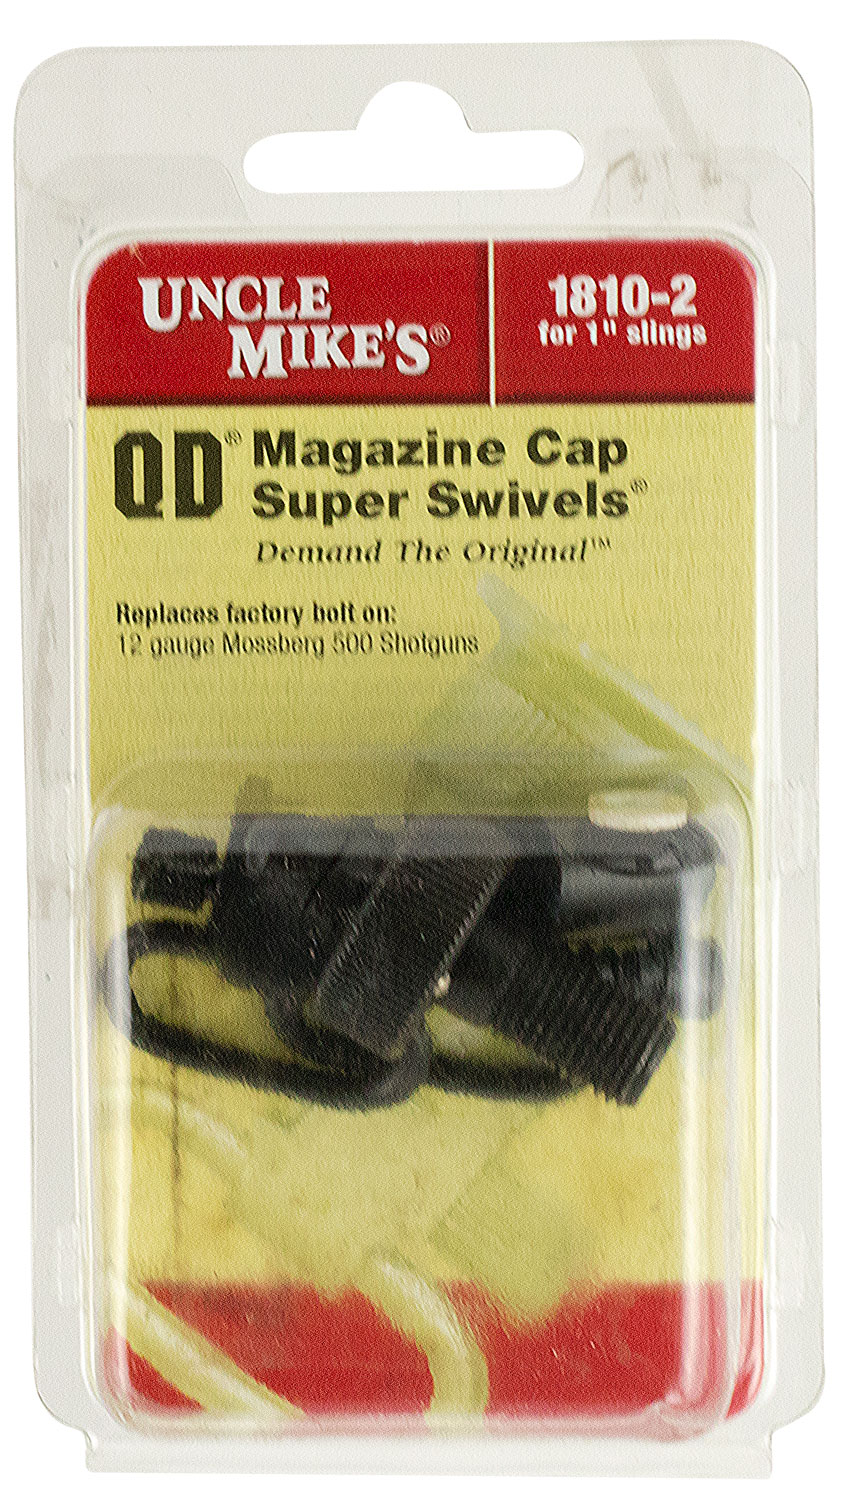 Uncle Mikes 18102 Mag Cap Swivel Set made of Steel with Blued Finish, 1